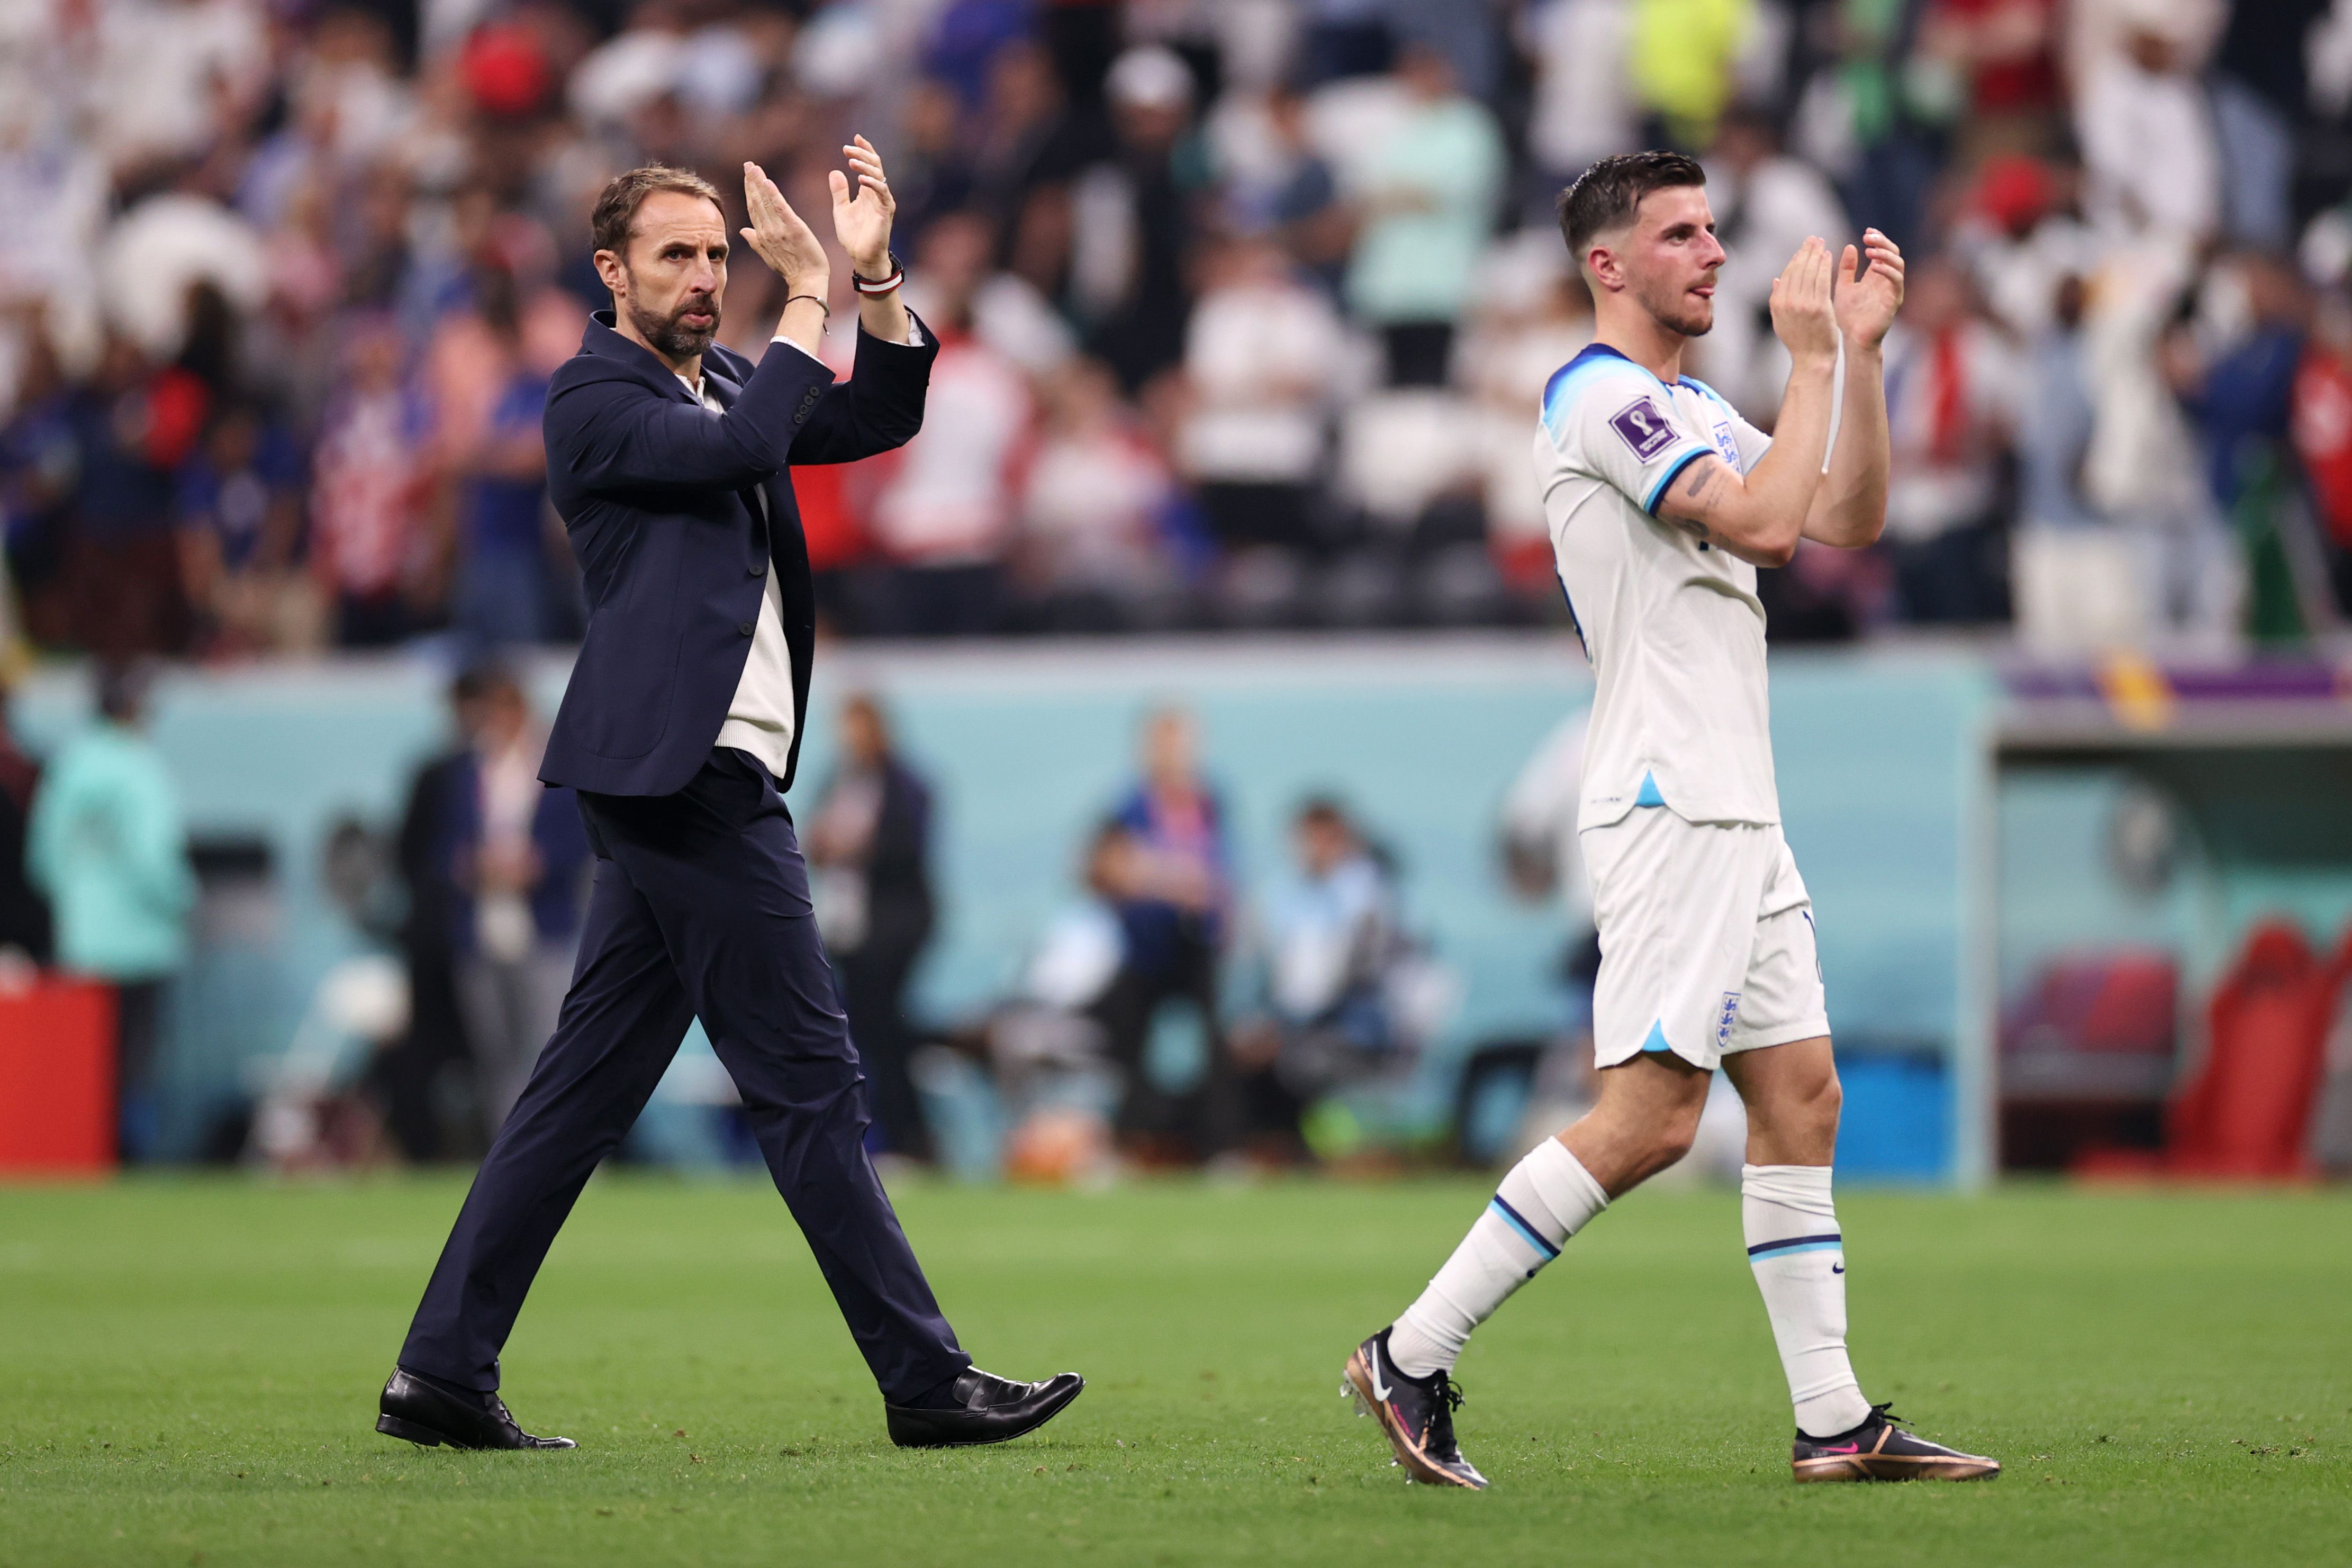 Gareth Southgate's England may come up short in the World Cup quarter-finals